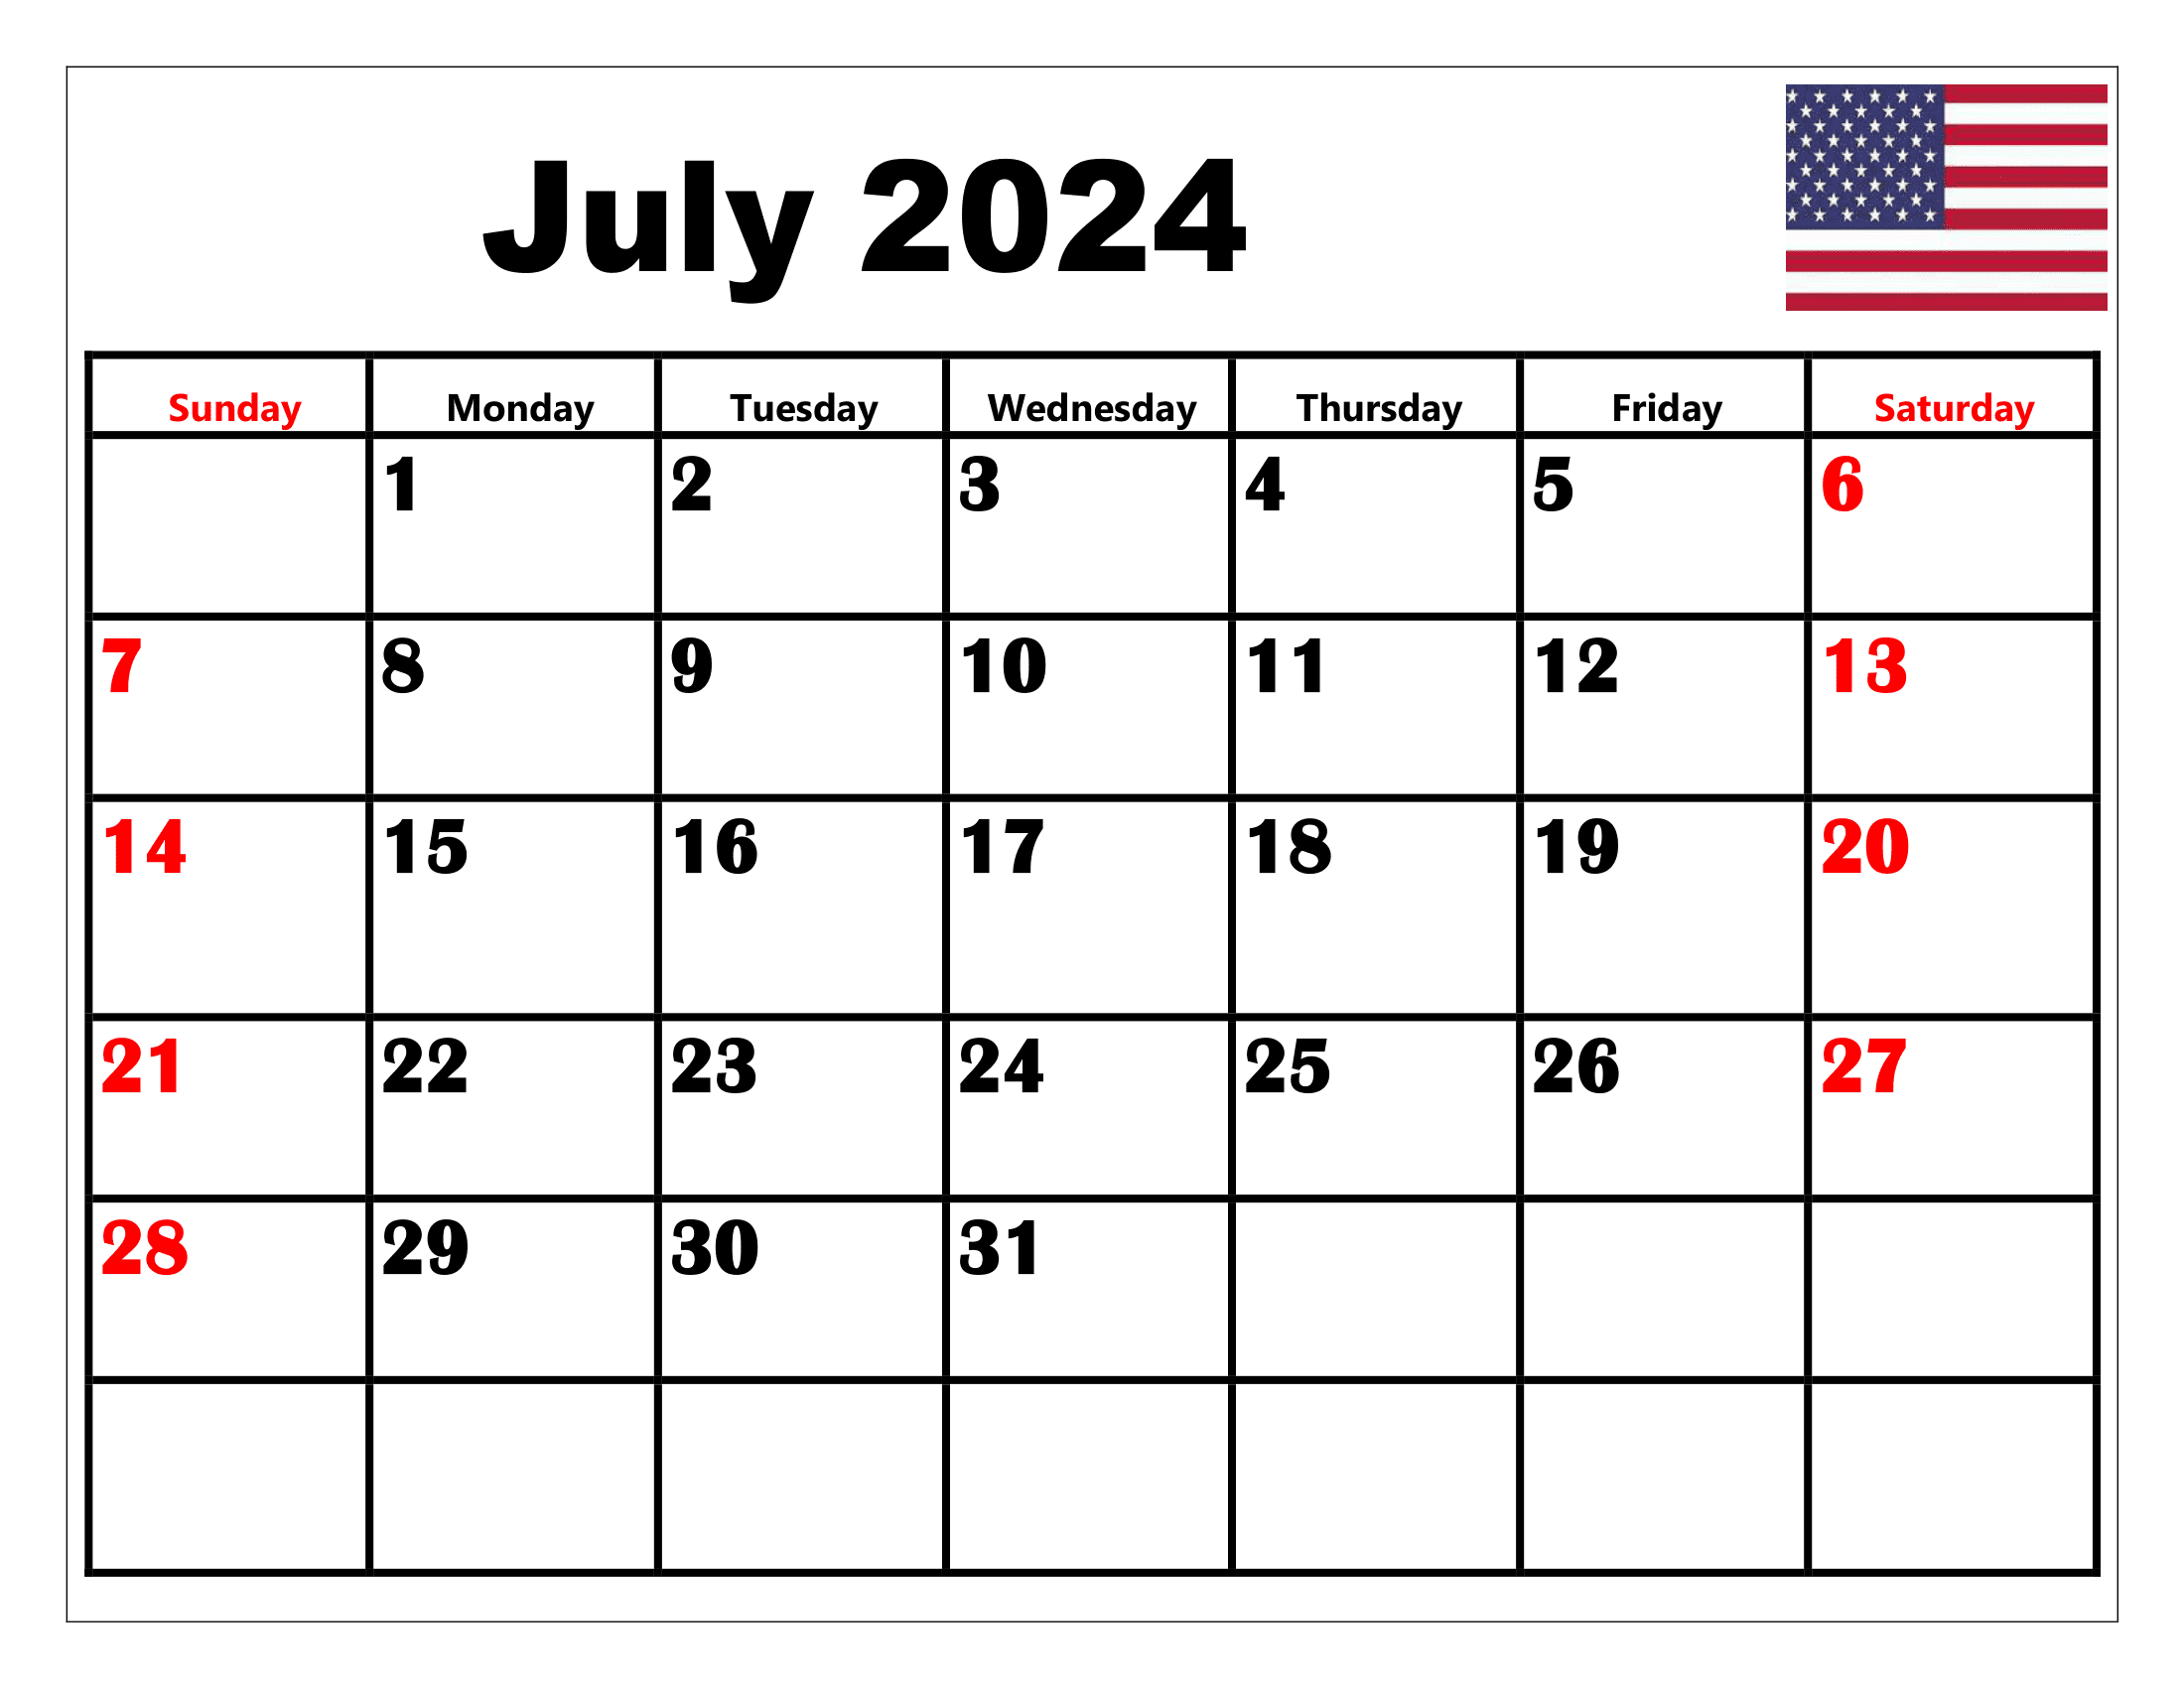 July 2024 Calendar Printable Pdf With Holidays Free Template pertaining to Free Printable Blank Calendar July 2024